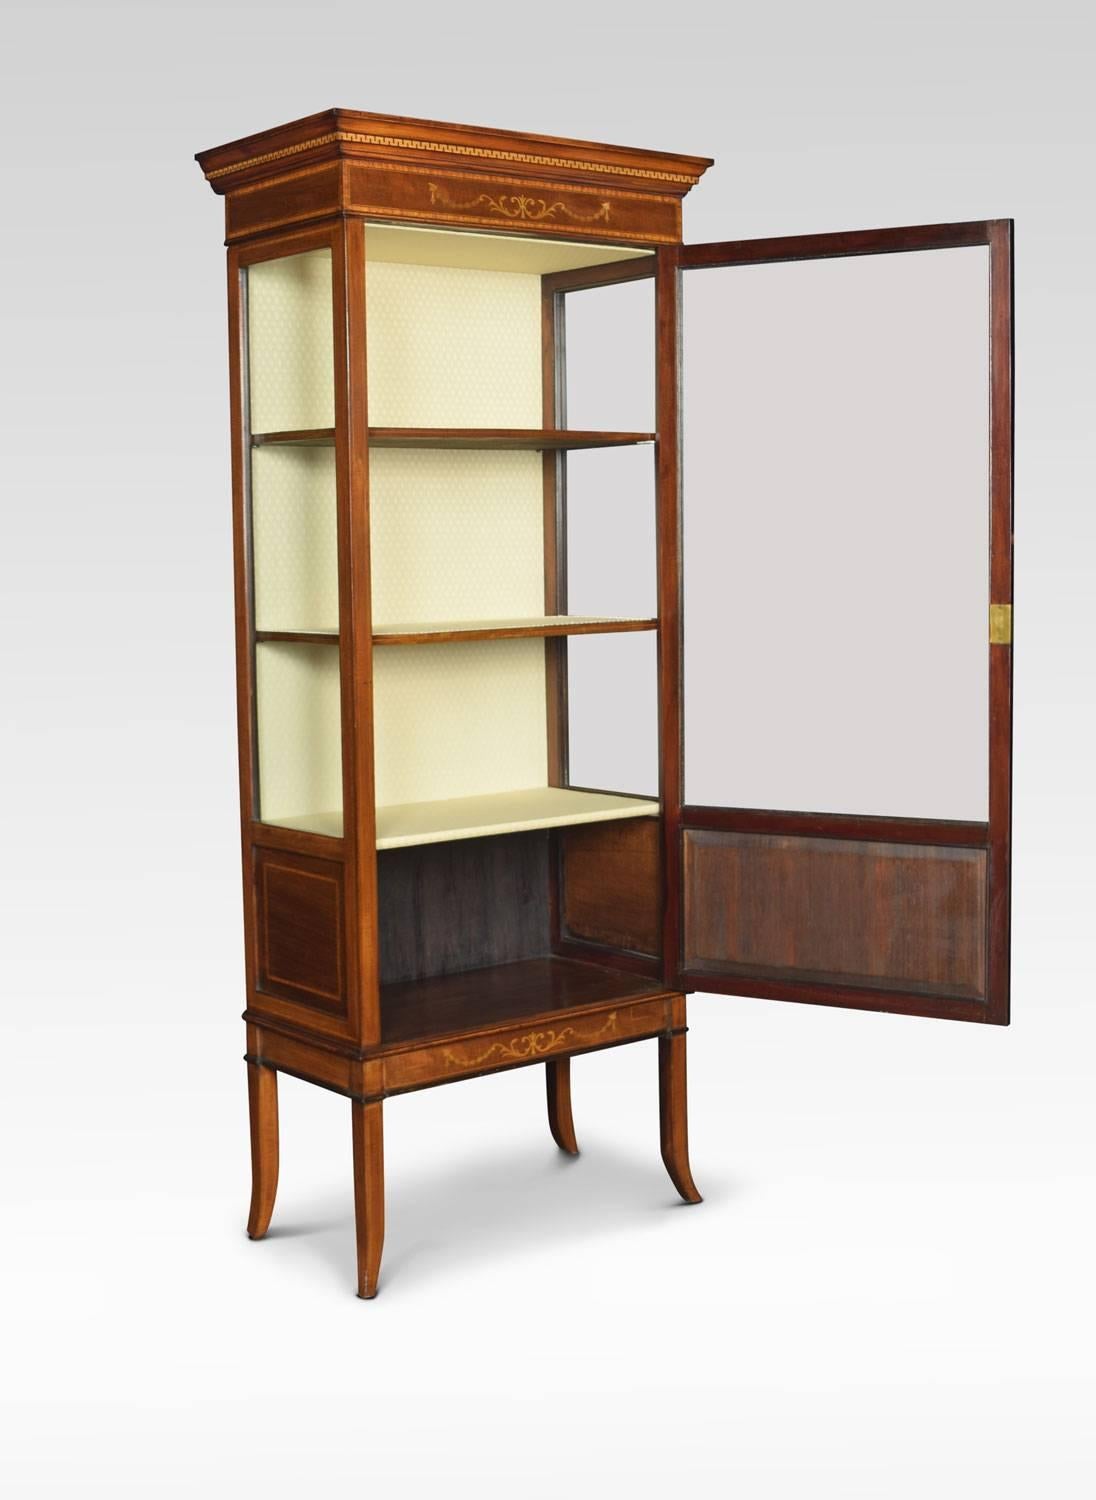 Mahogany Sheraton Revival display cabinet, the rectangular moulded top over inlaid freeze, having large glazed door below. Opening to reveal an upholstered shelved interior. All raised up on four splayed supports.
Dimensions
Height 70.5